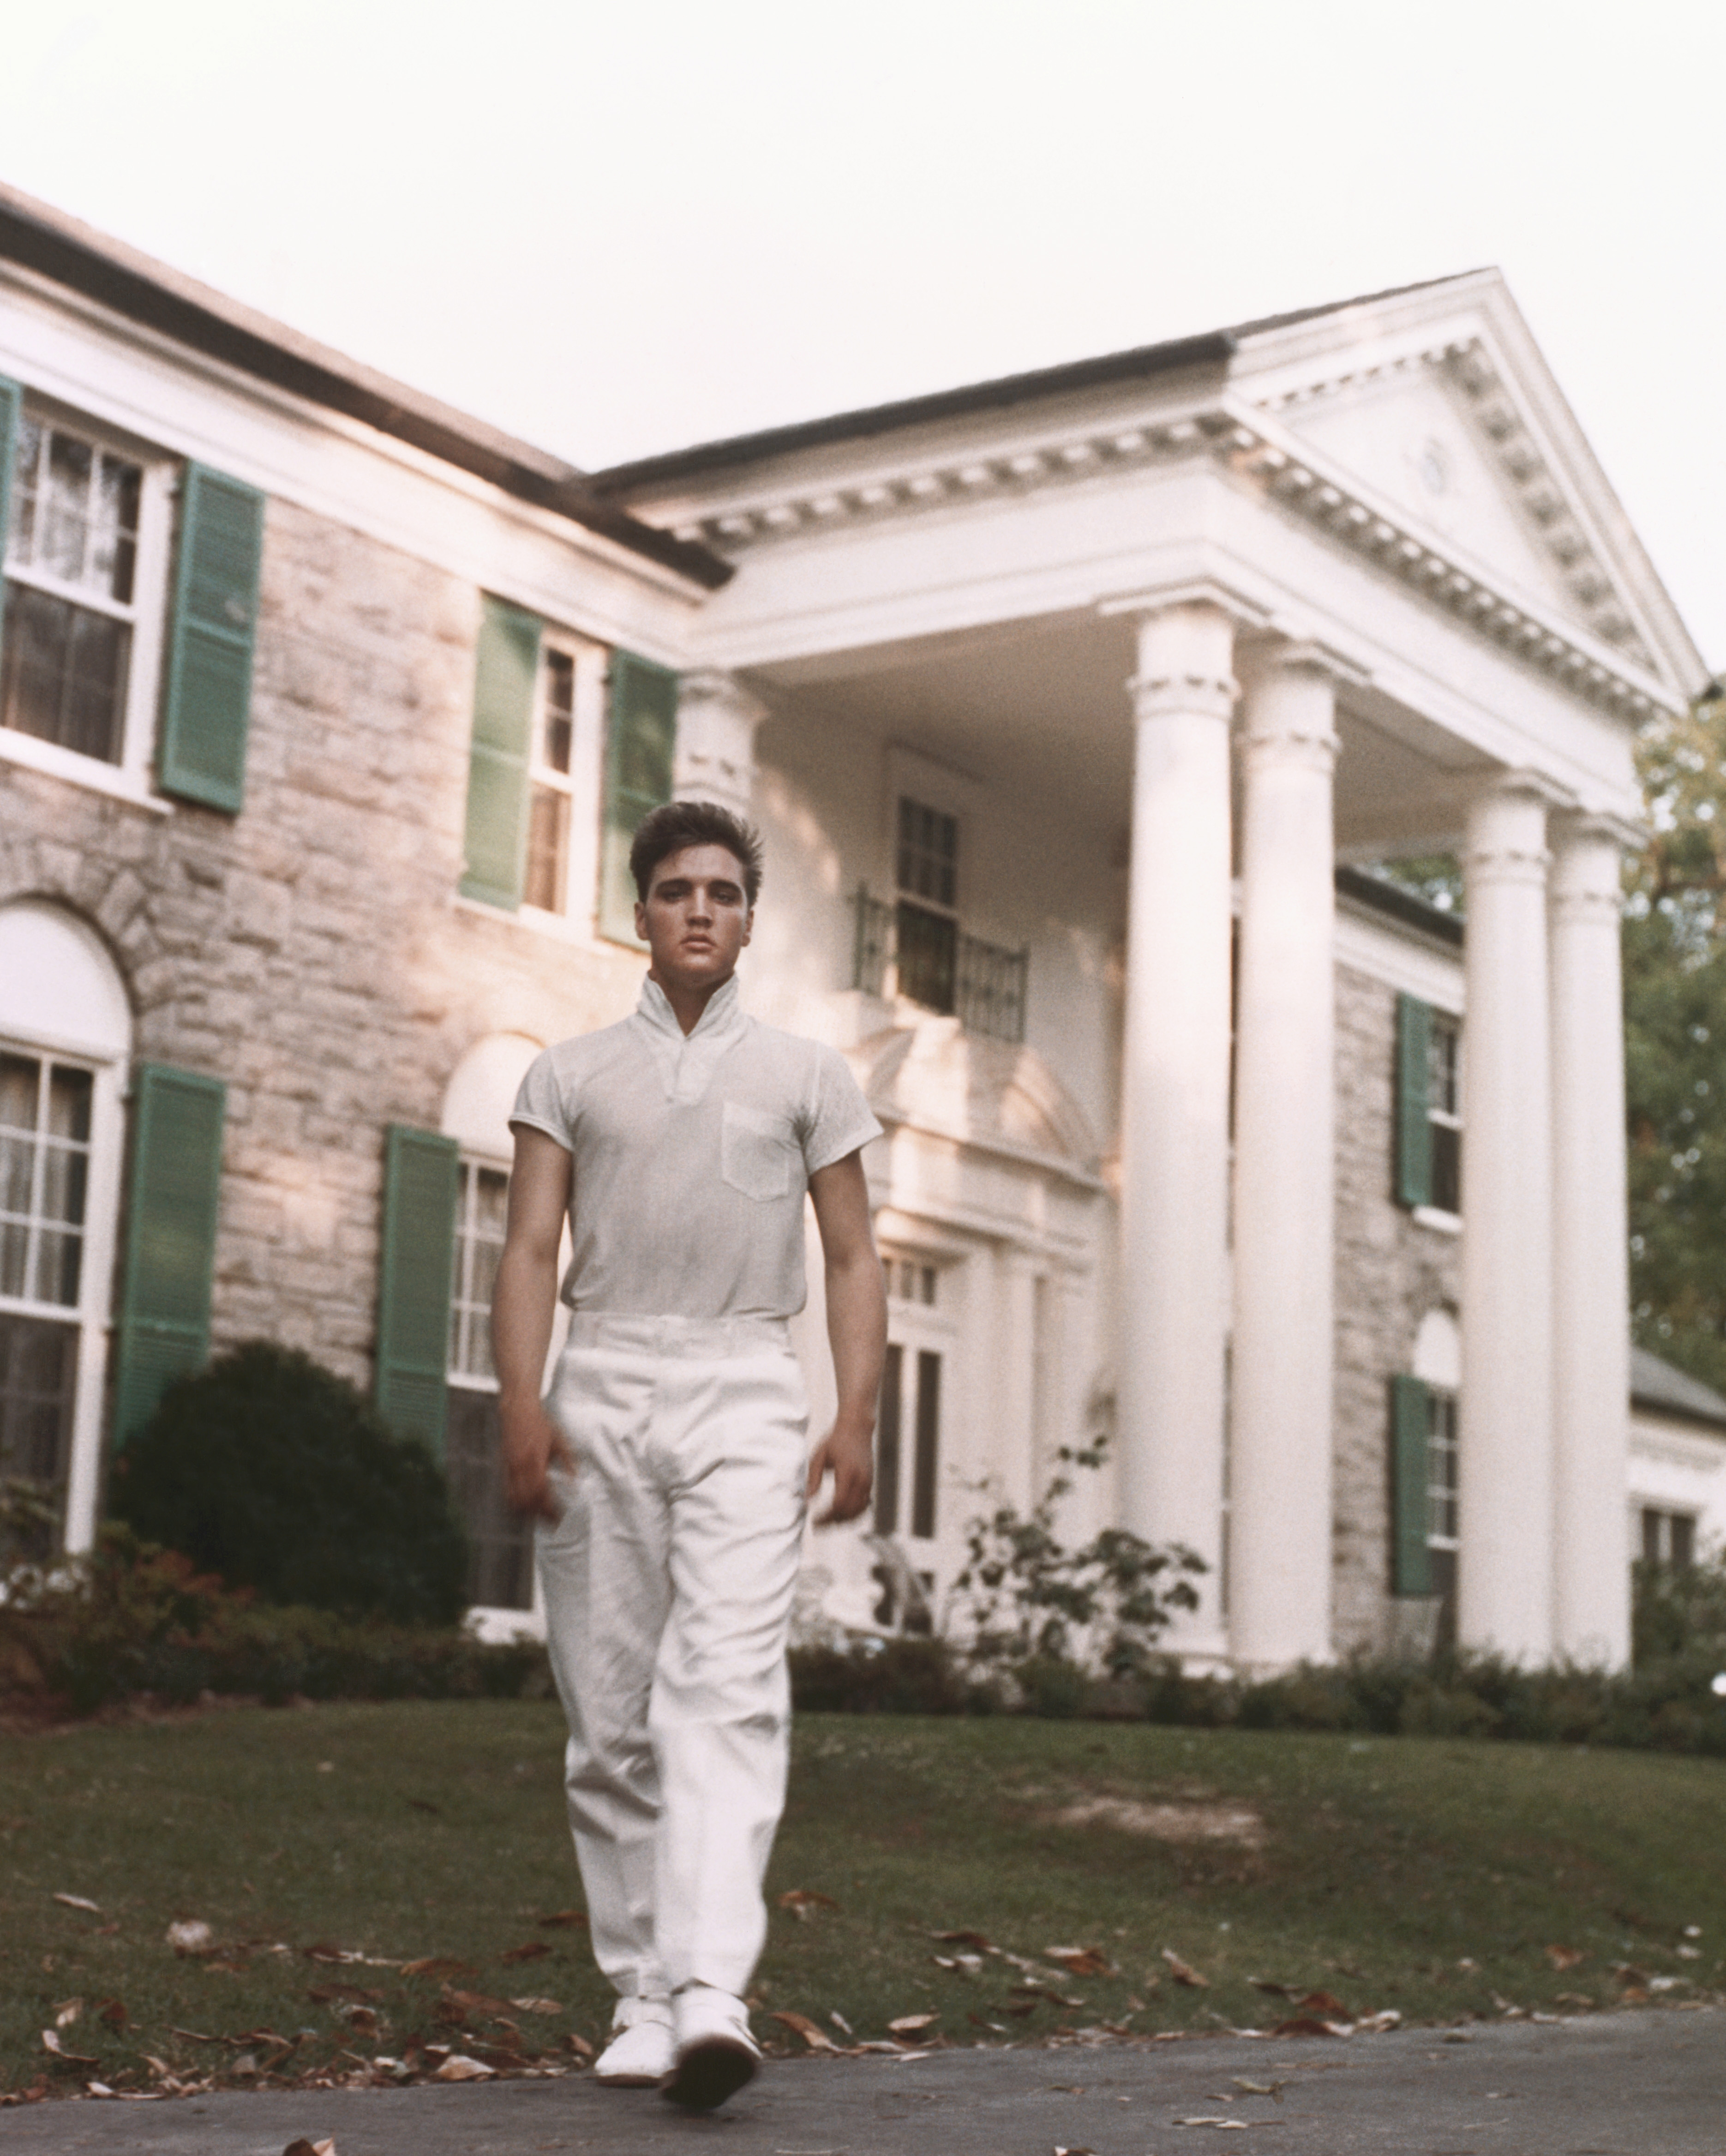 Elvis Presley on the grounds of his Graceland estate, circa 1957 | Source: Getty Images